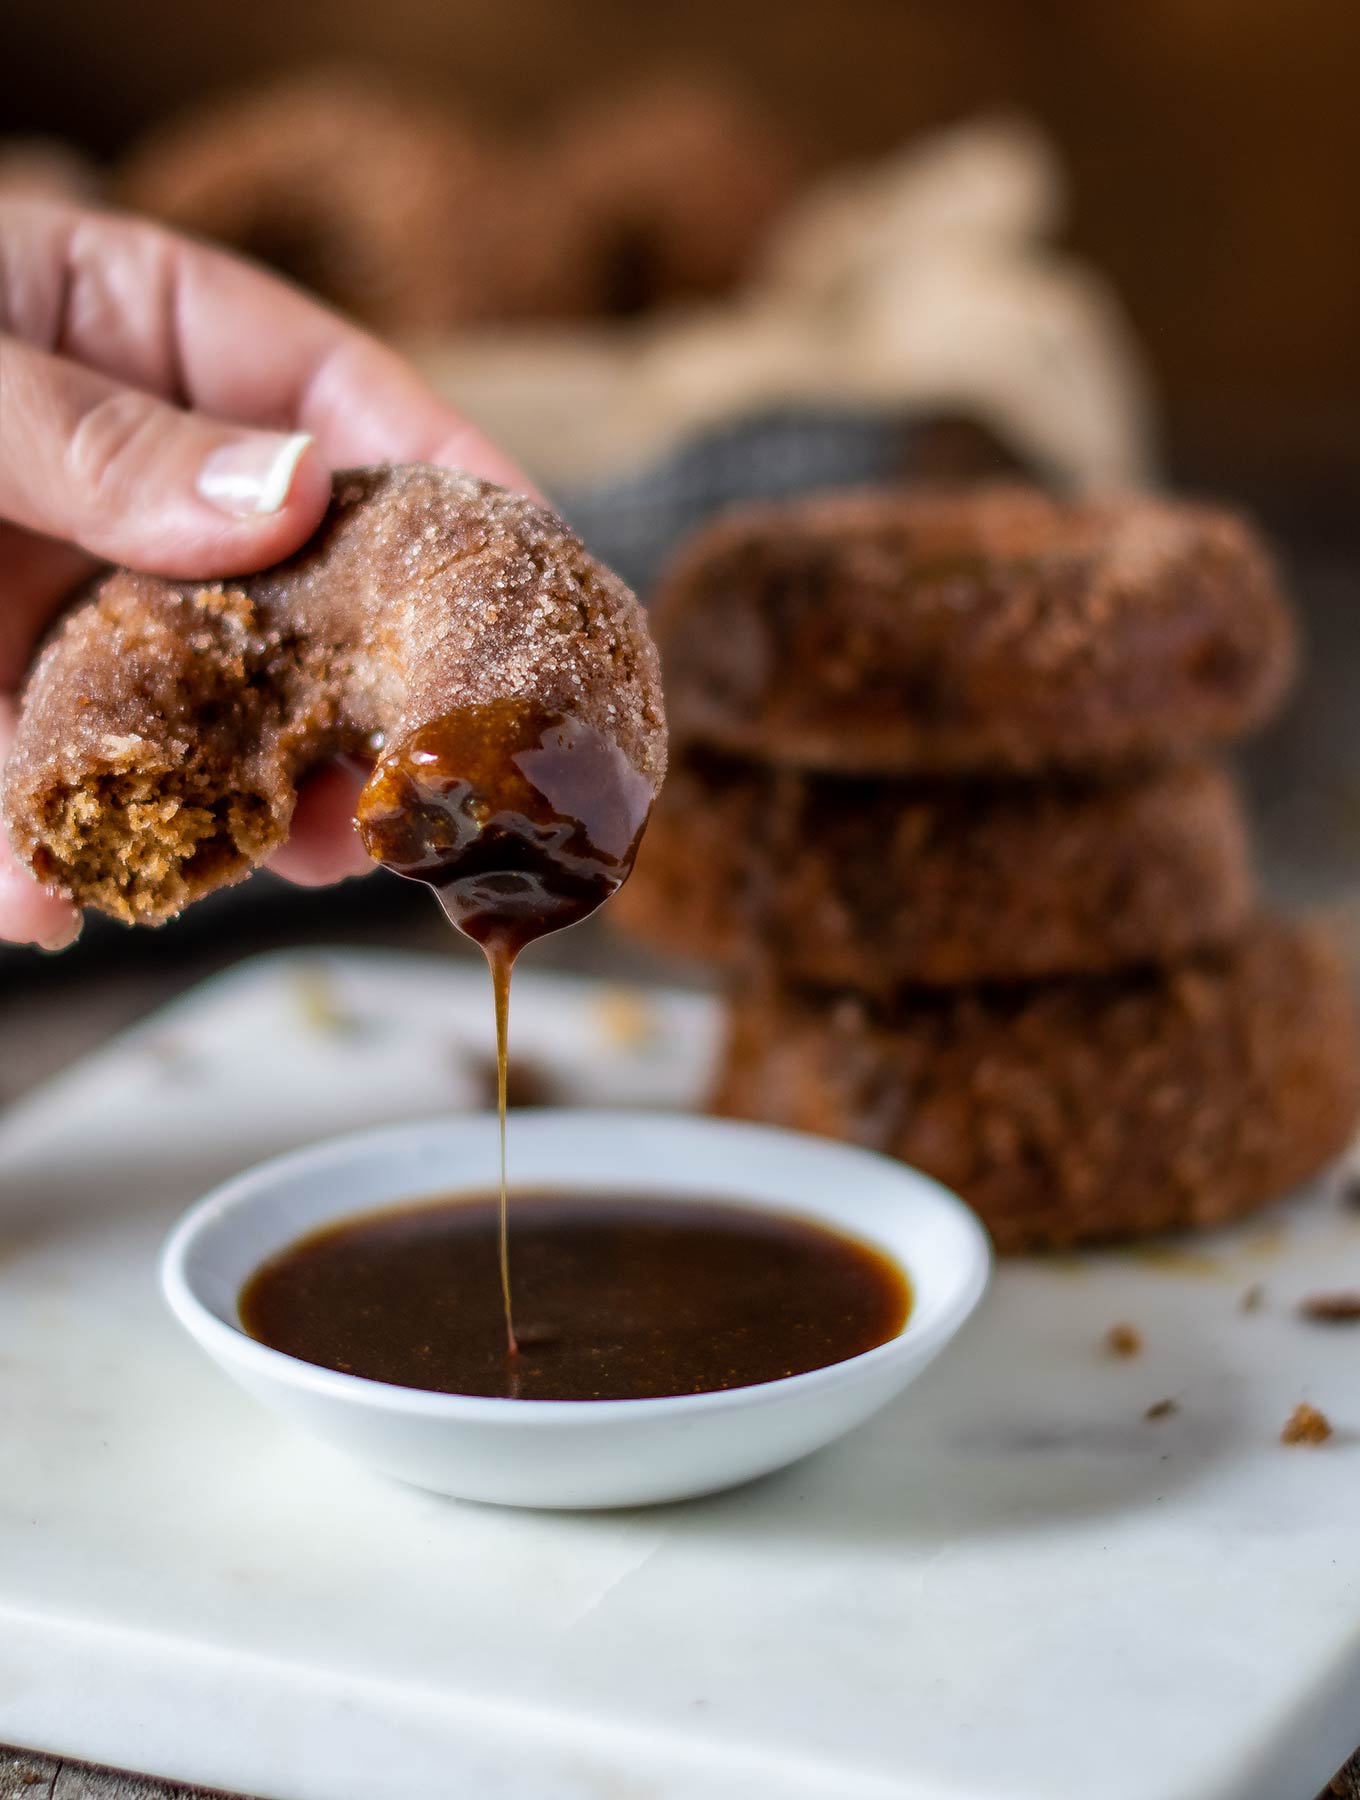 cardamom donut dipped in curry caramel sauce